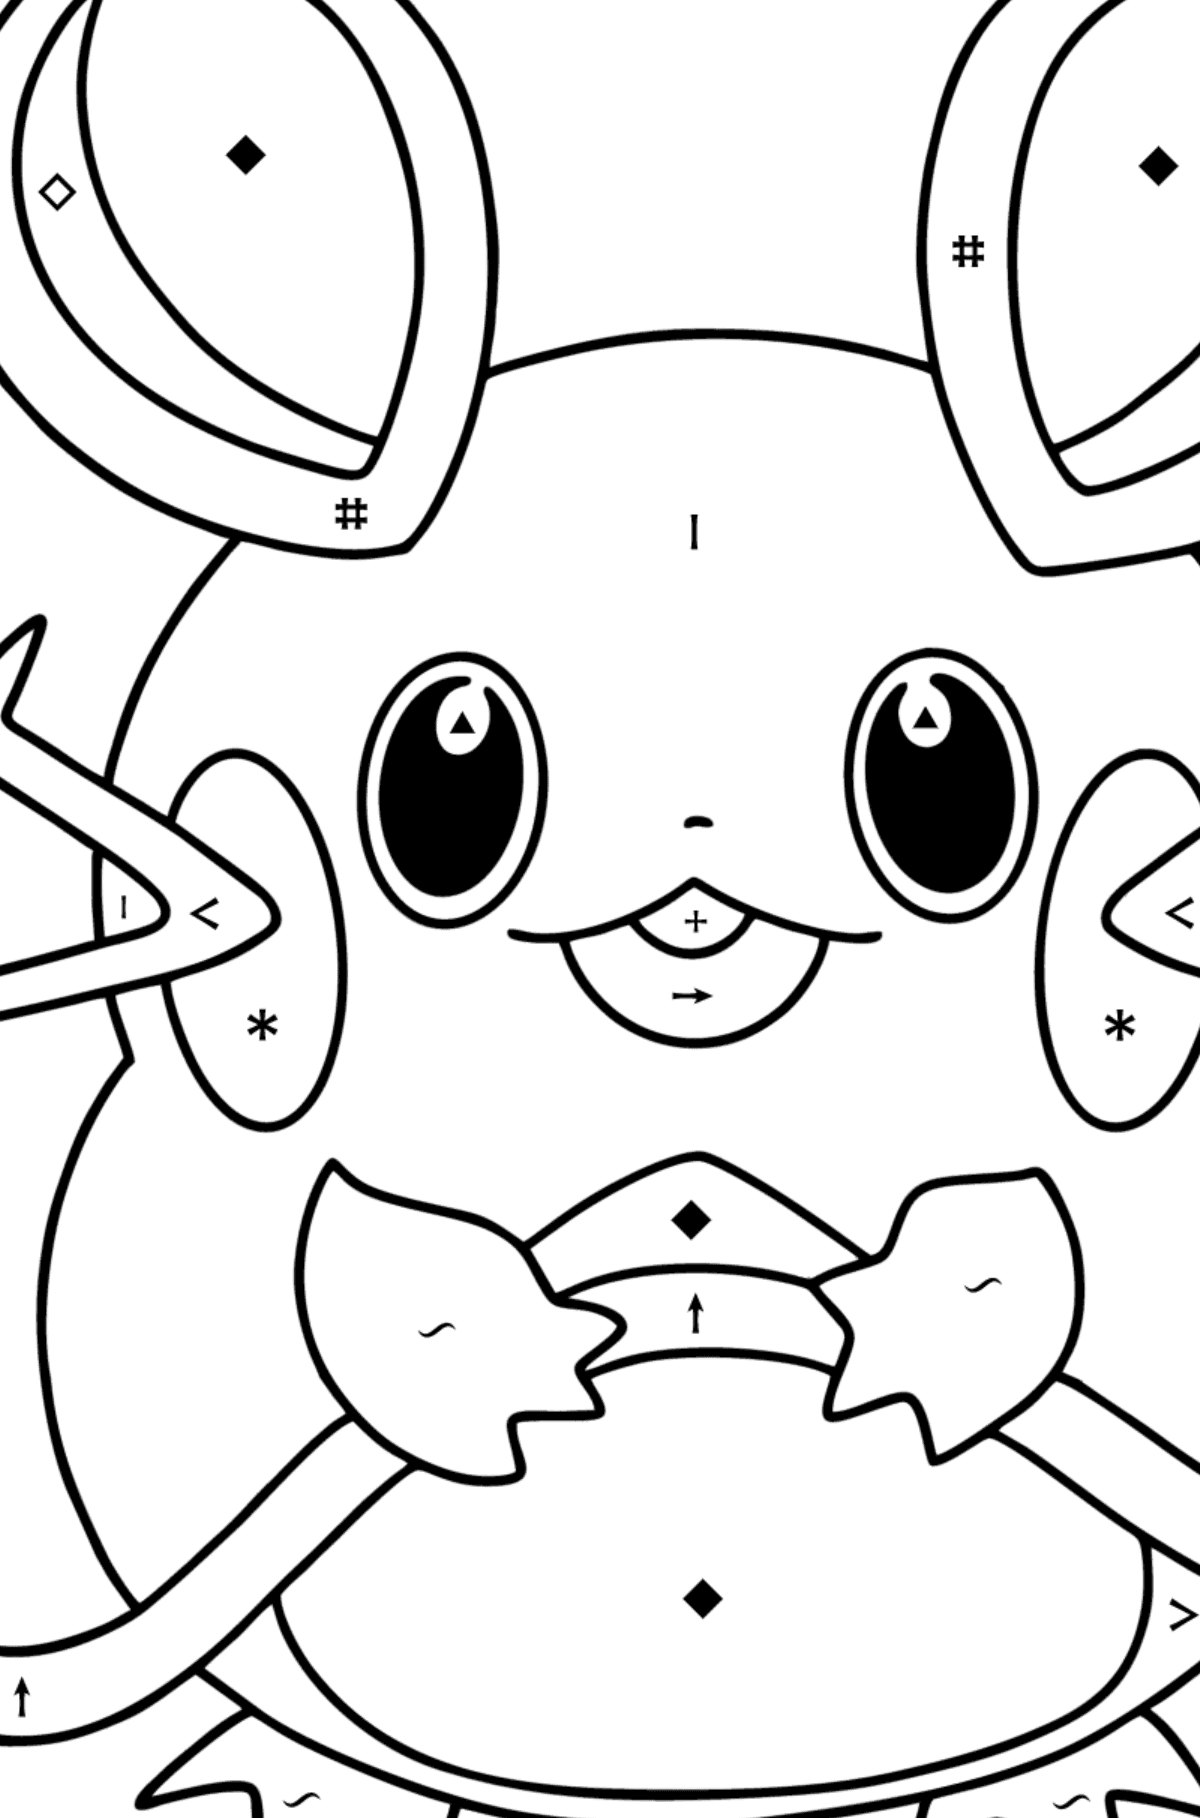 Colouring page Pokémon X and Y Dedenne - Coloring by Symbols for Kids